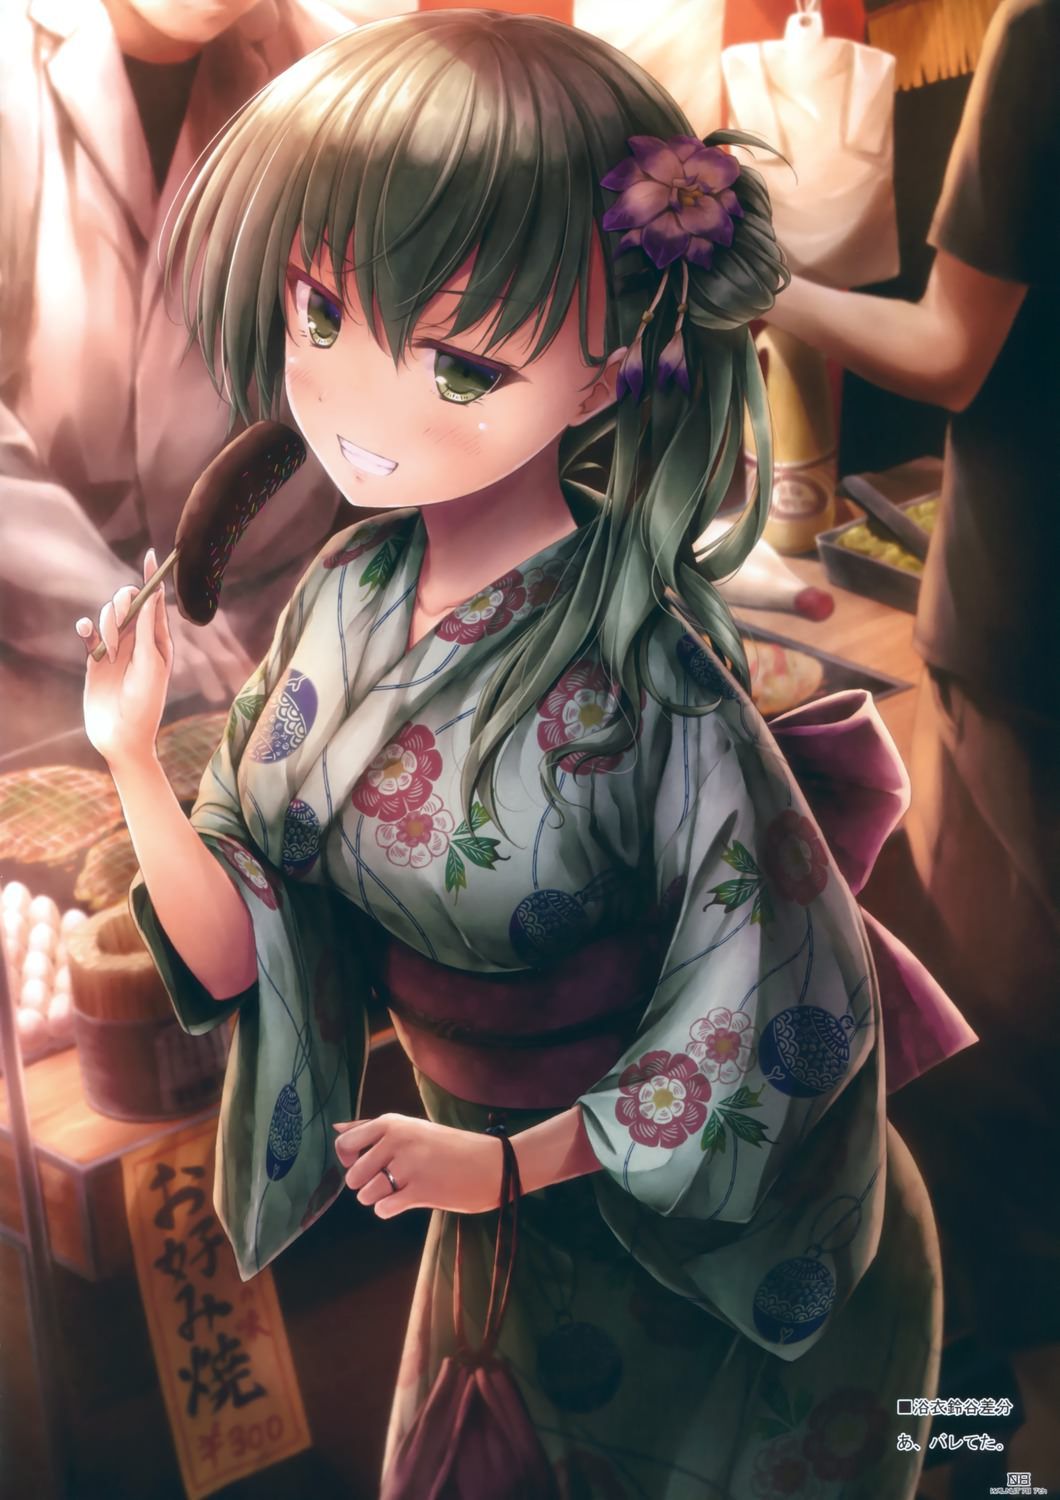 Appeal of kimono and yukata examined in erotic pictures 6